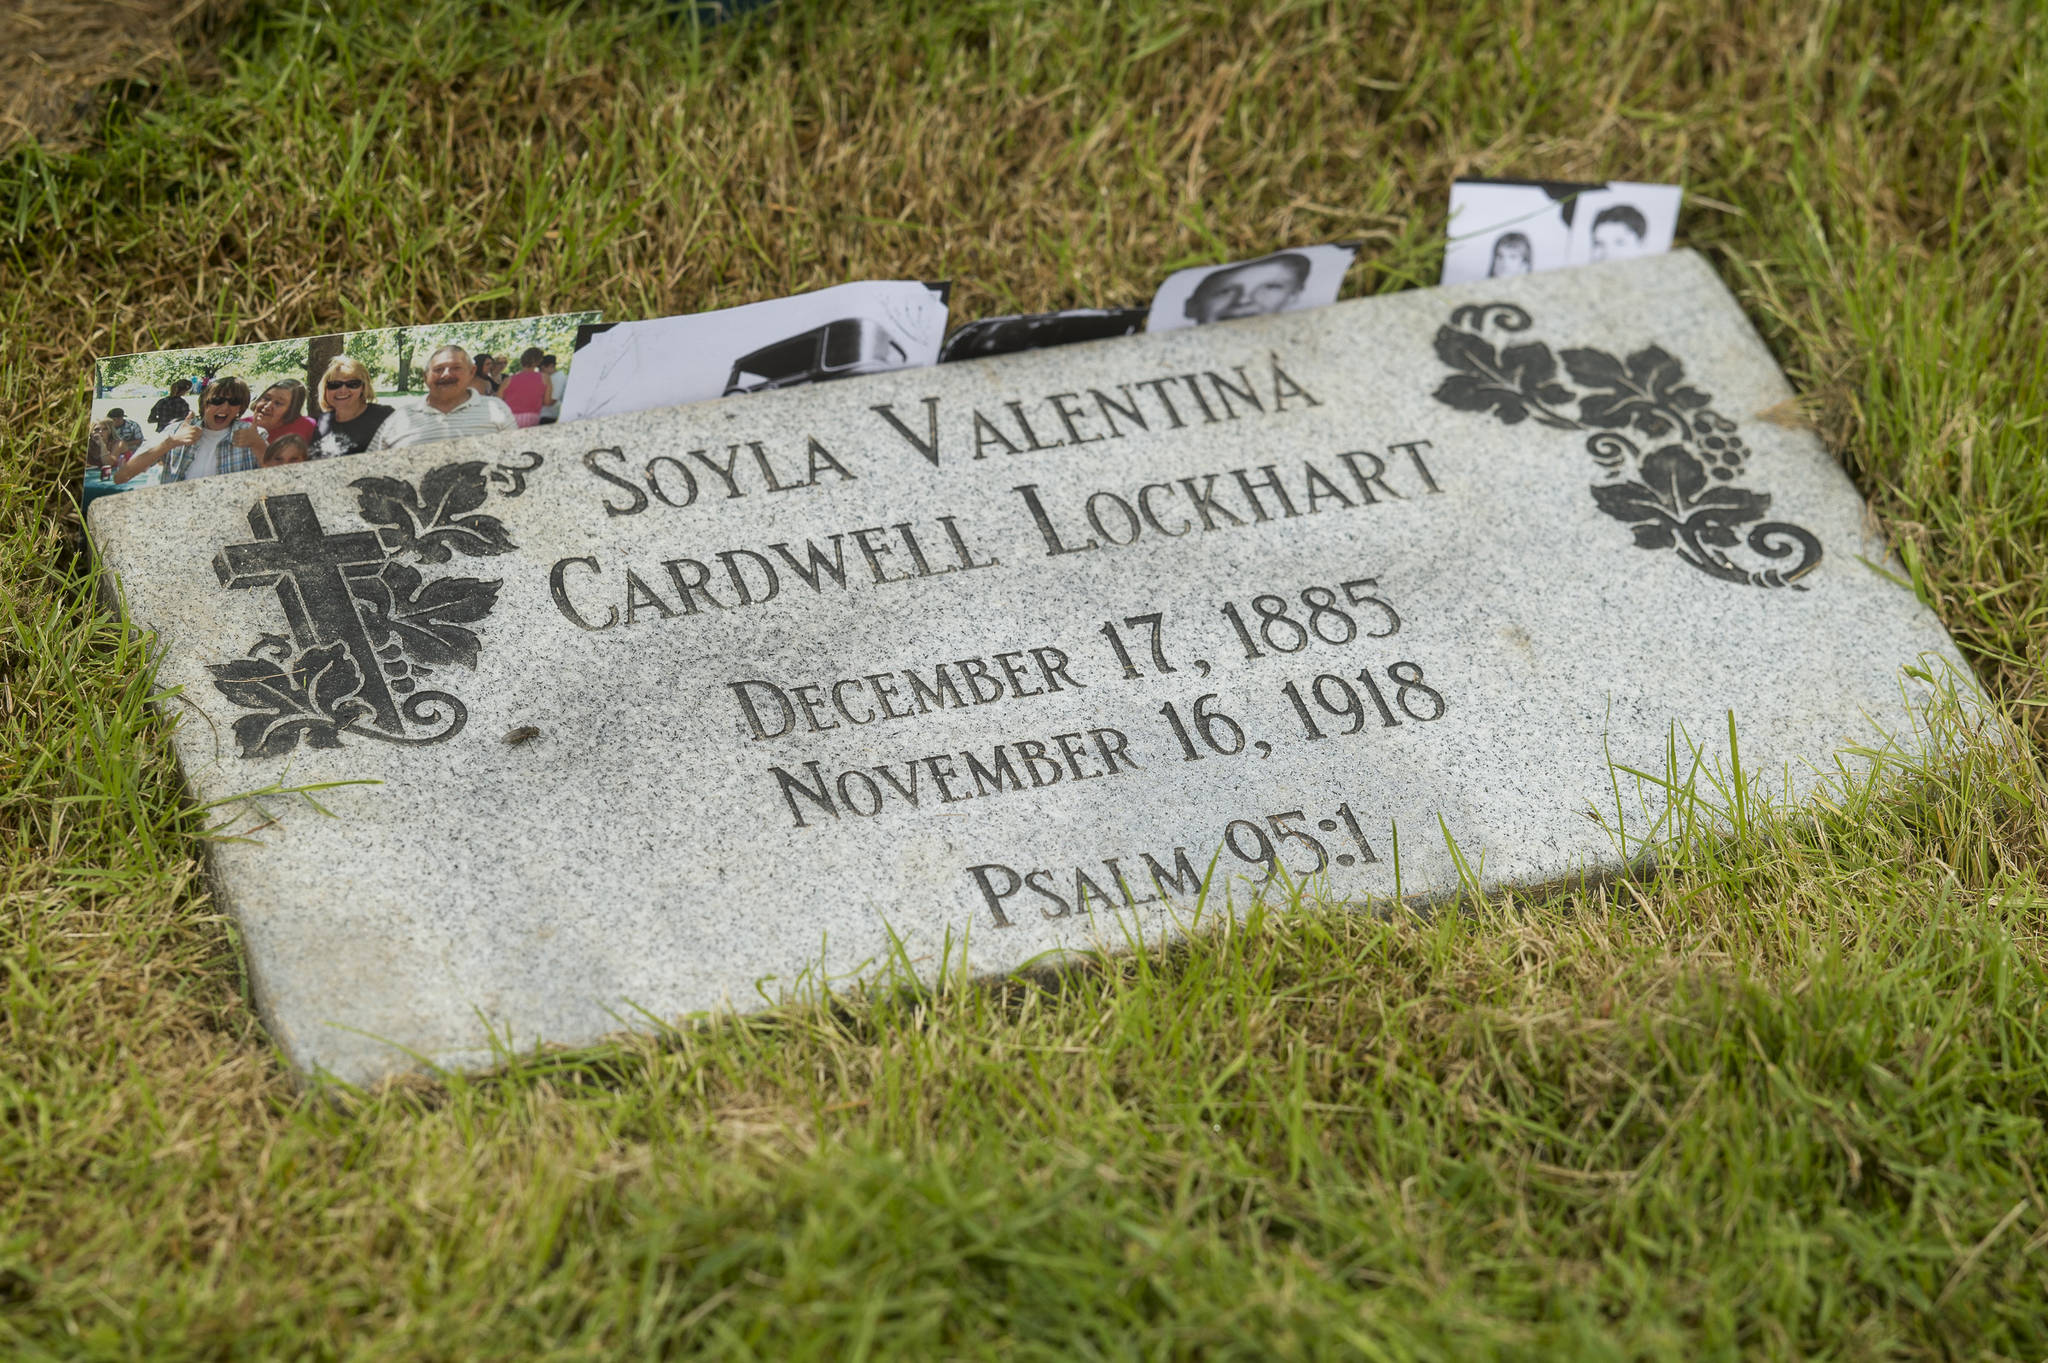 A new head stone in place for Soyla Valentina Cardwell Lockhart at Evergreen Cemetery on Tuesday, July 17, 2018. (Michael Penn | Juneau Empire)